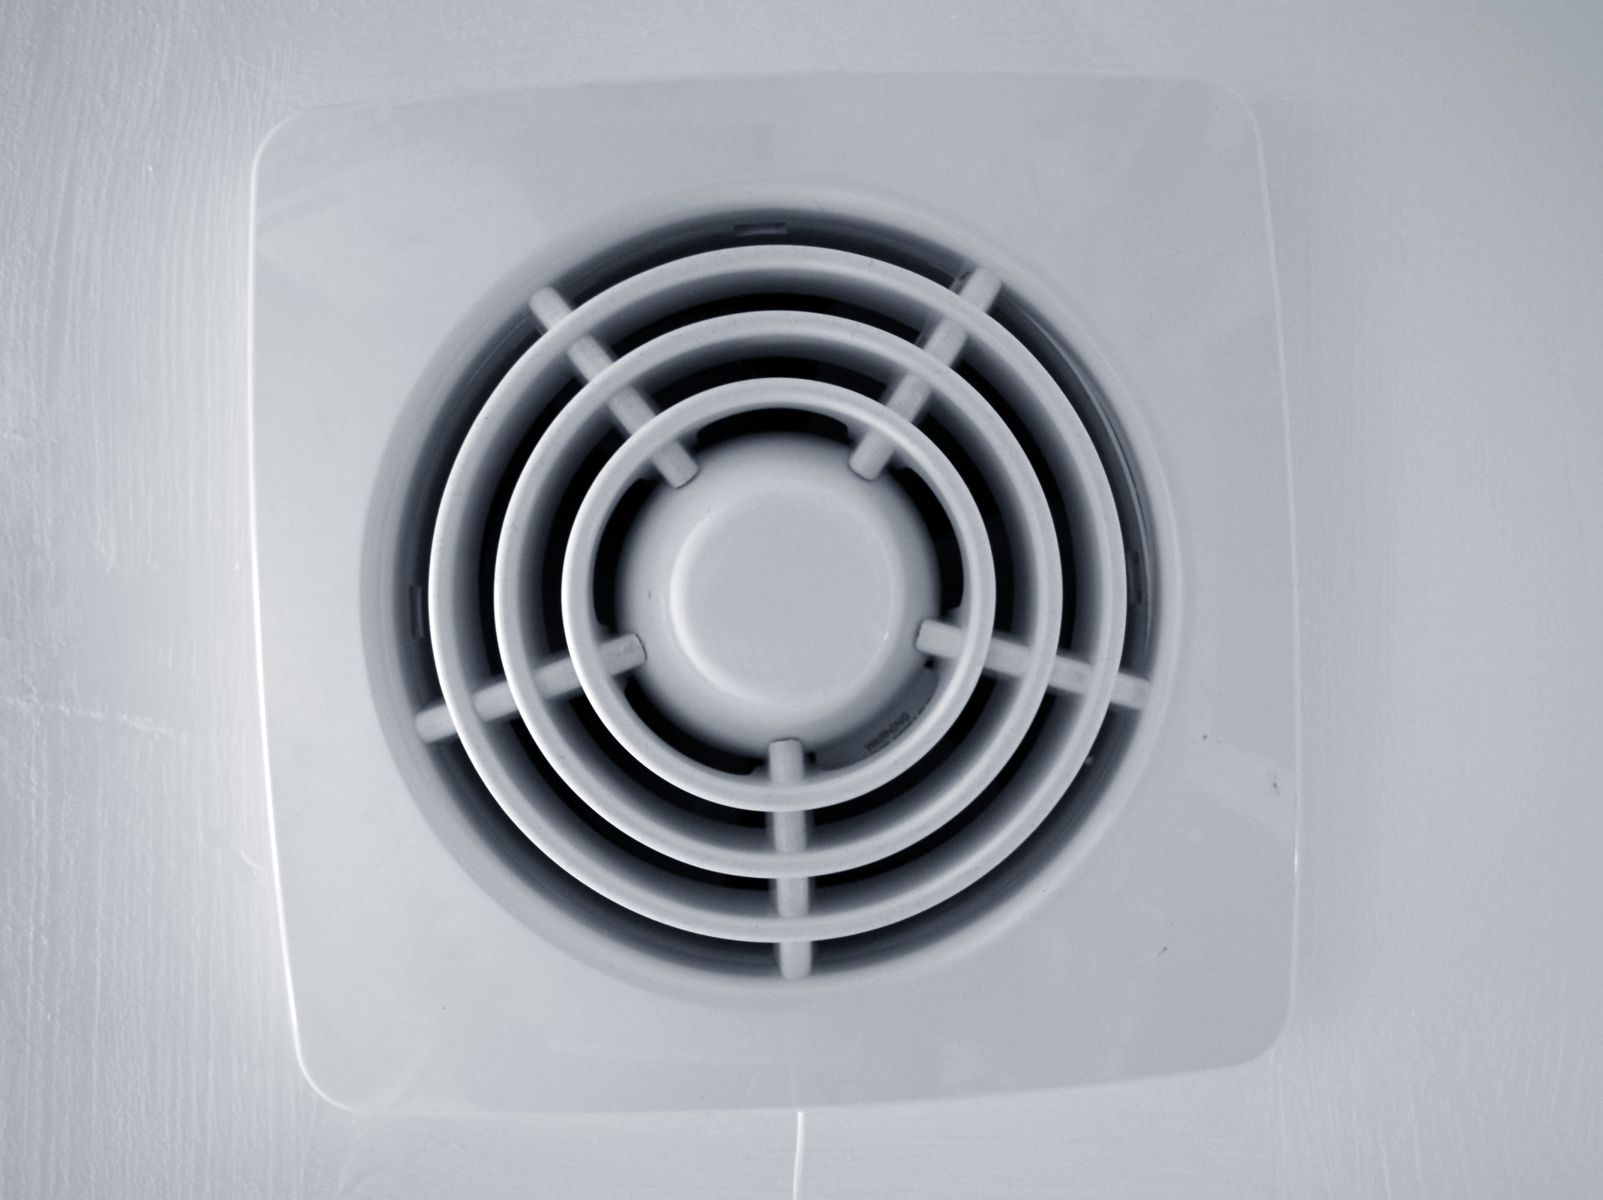 Bathroom Exhaust Fan Venting Code Basics intended for measurements 1603 X 1200